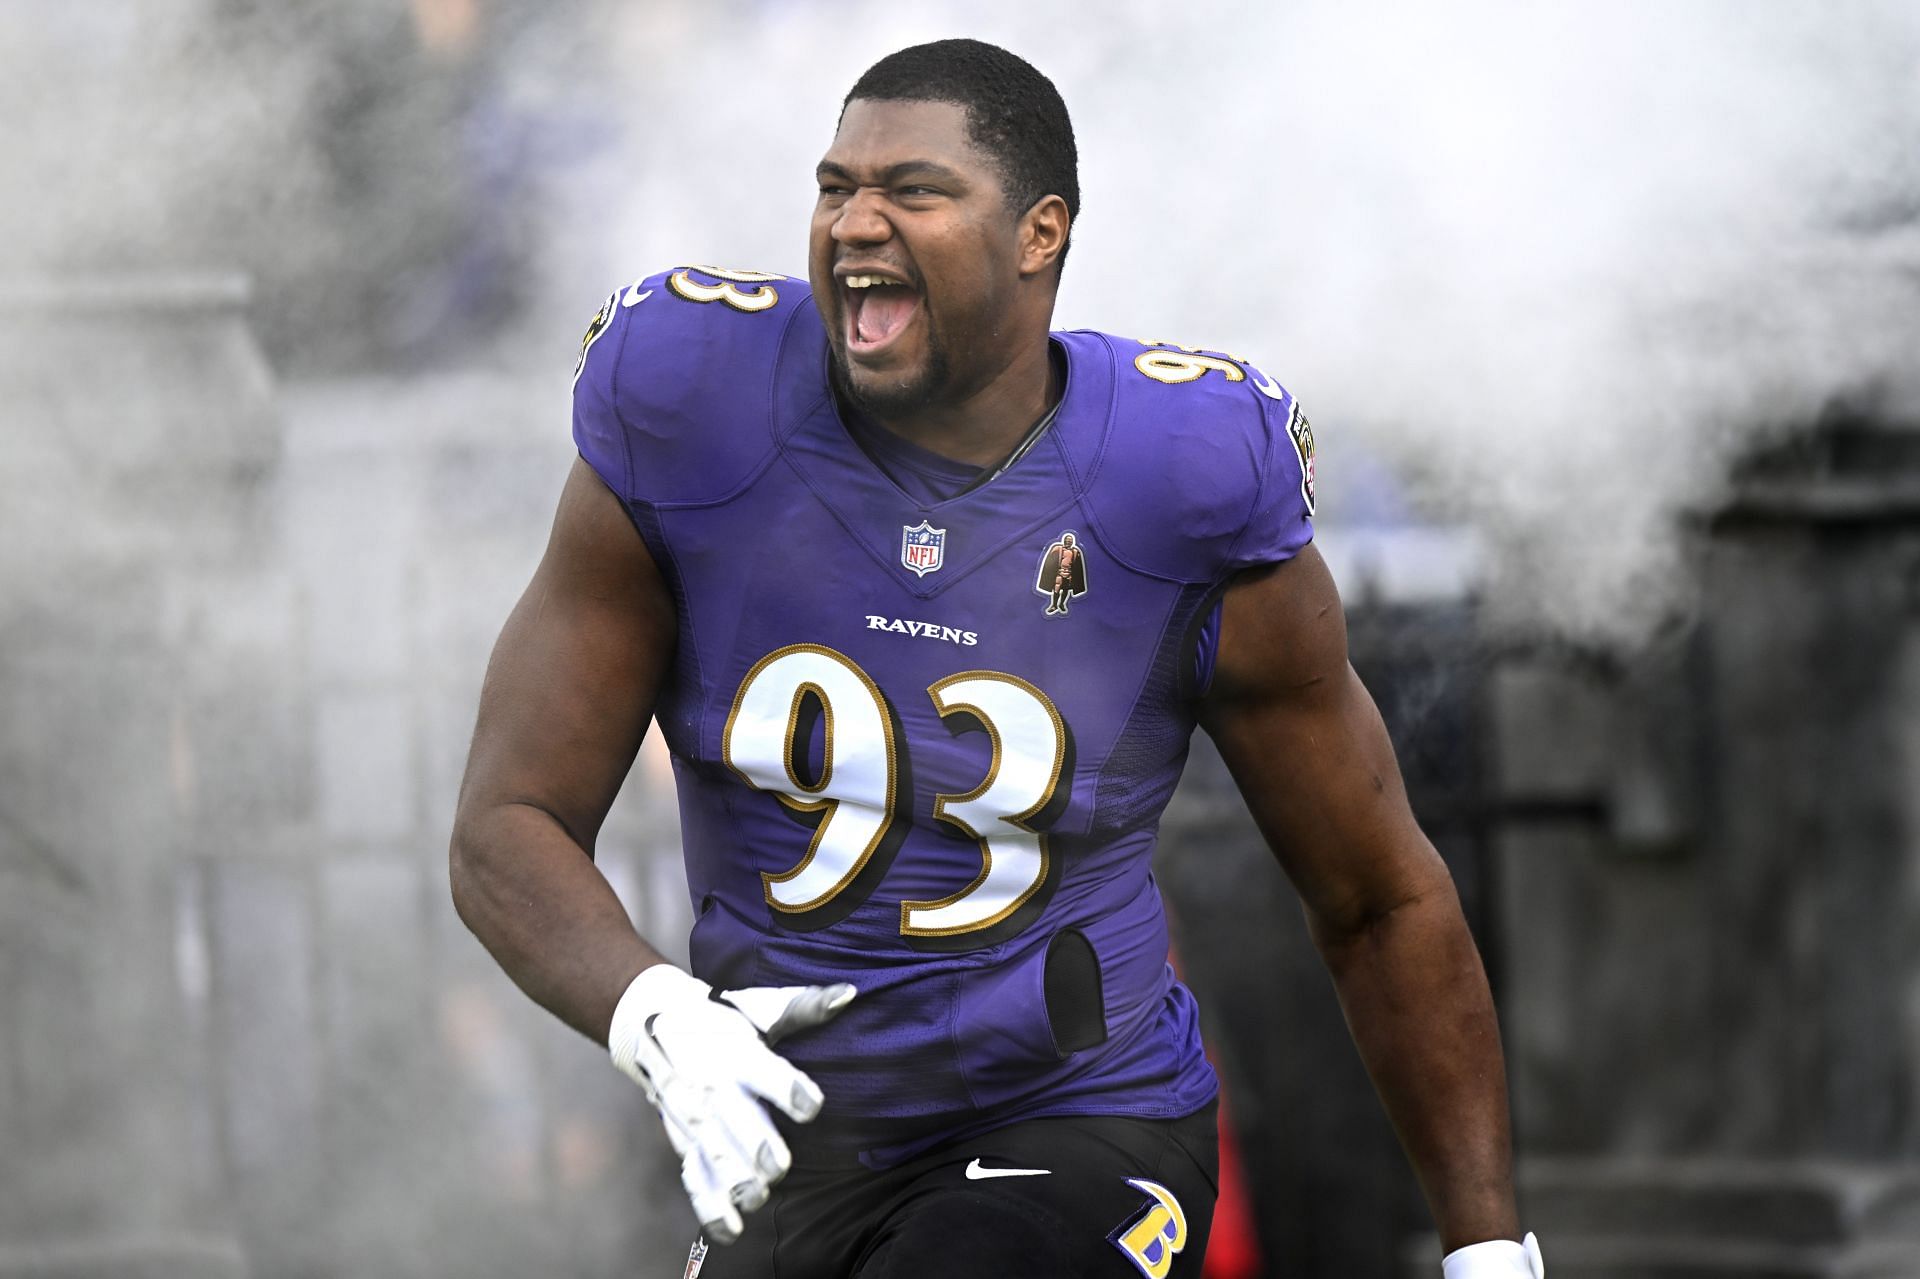 Calais Campbell is one of the oldest players in the NFL today